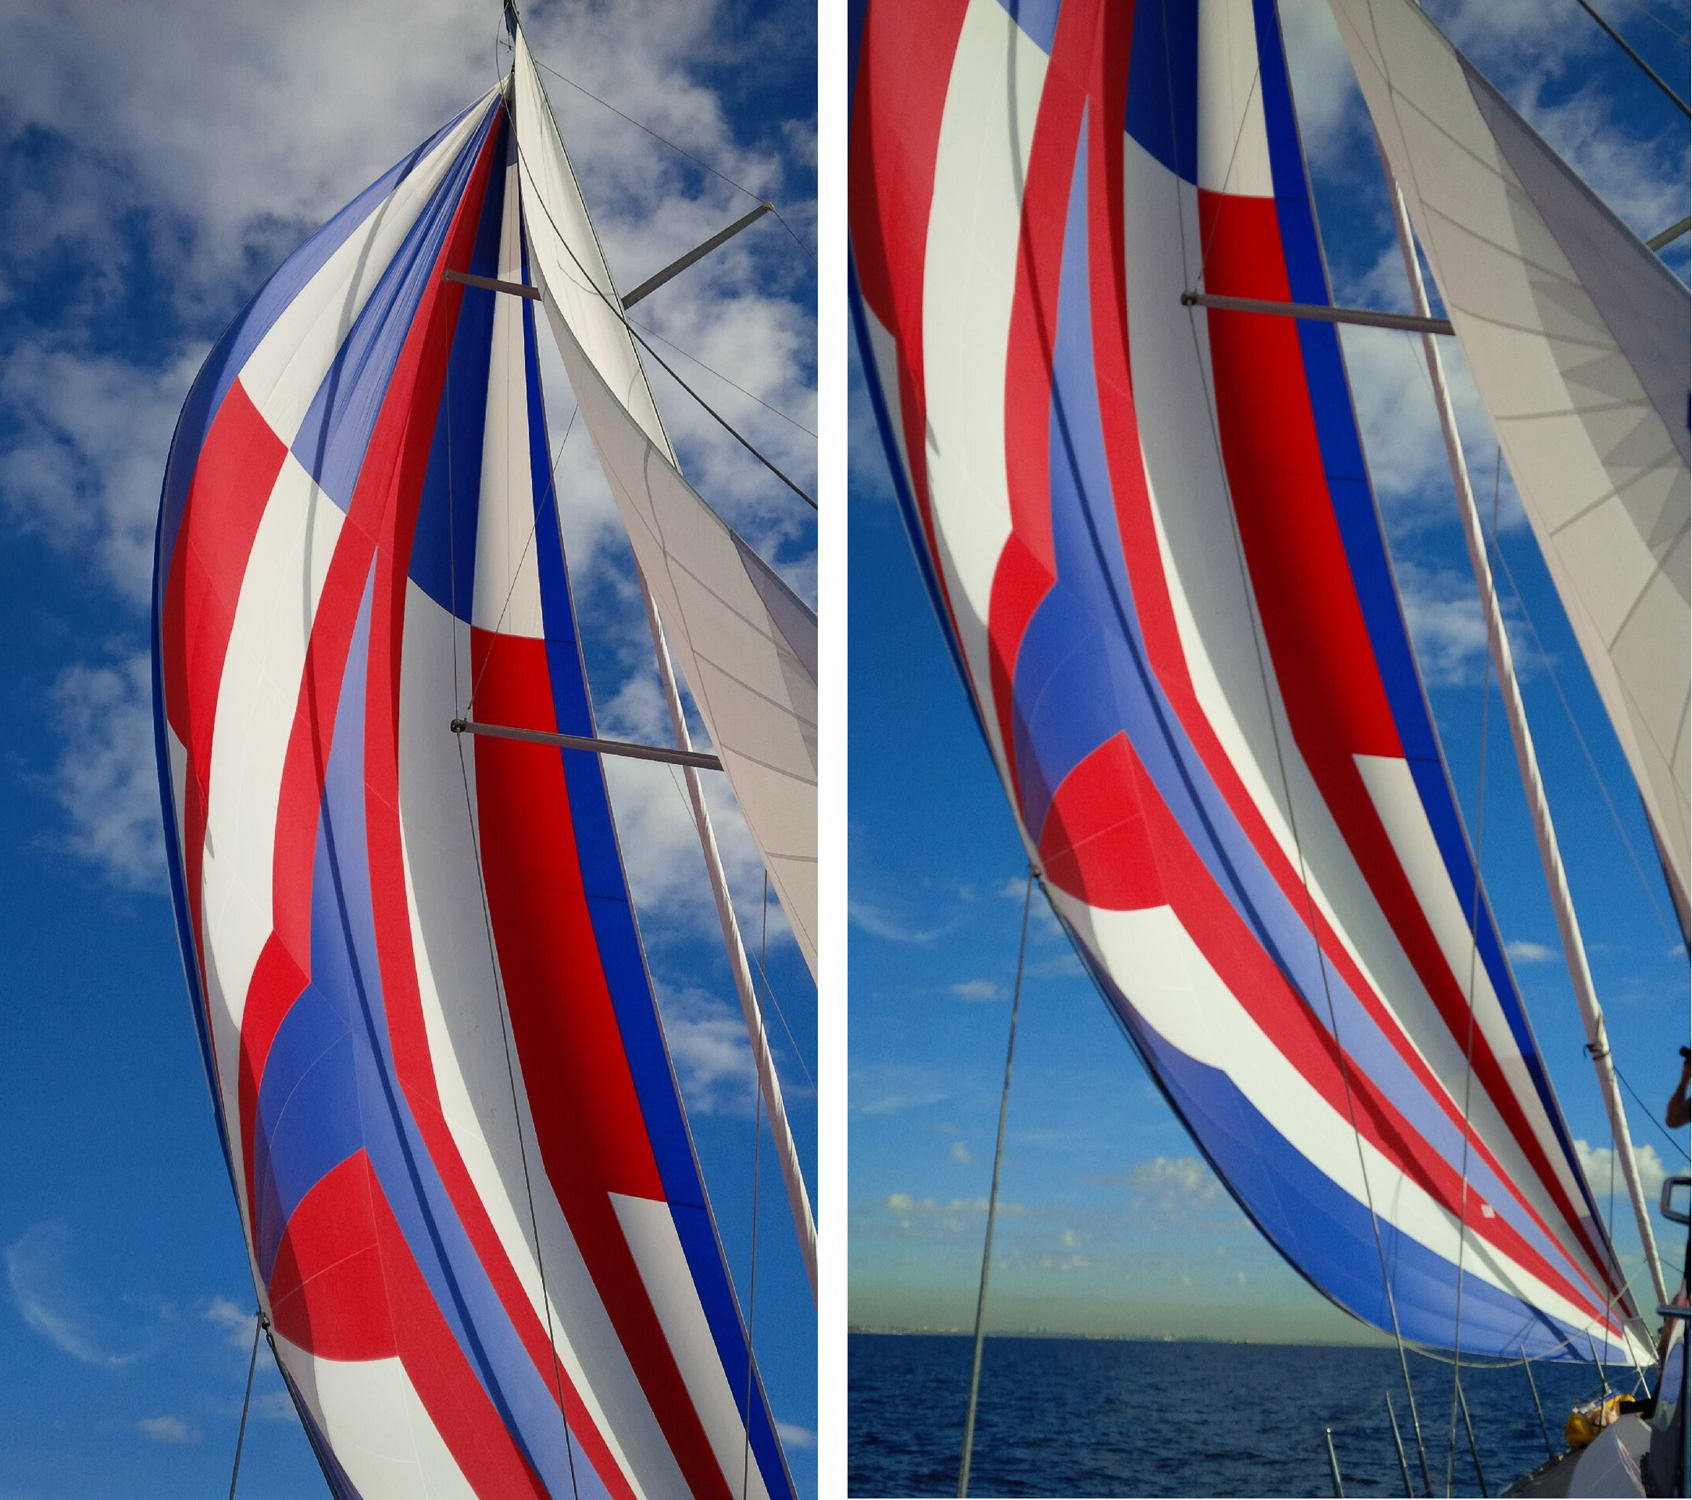 UK Sailmakers designs cruising code zeros where the width of the sail is narrower than on race boats, which makes the sail easier to fly and more versatile. These shots show a cruising code zero on a Beneteau Oceanis 55.